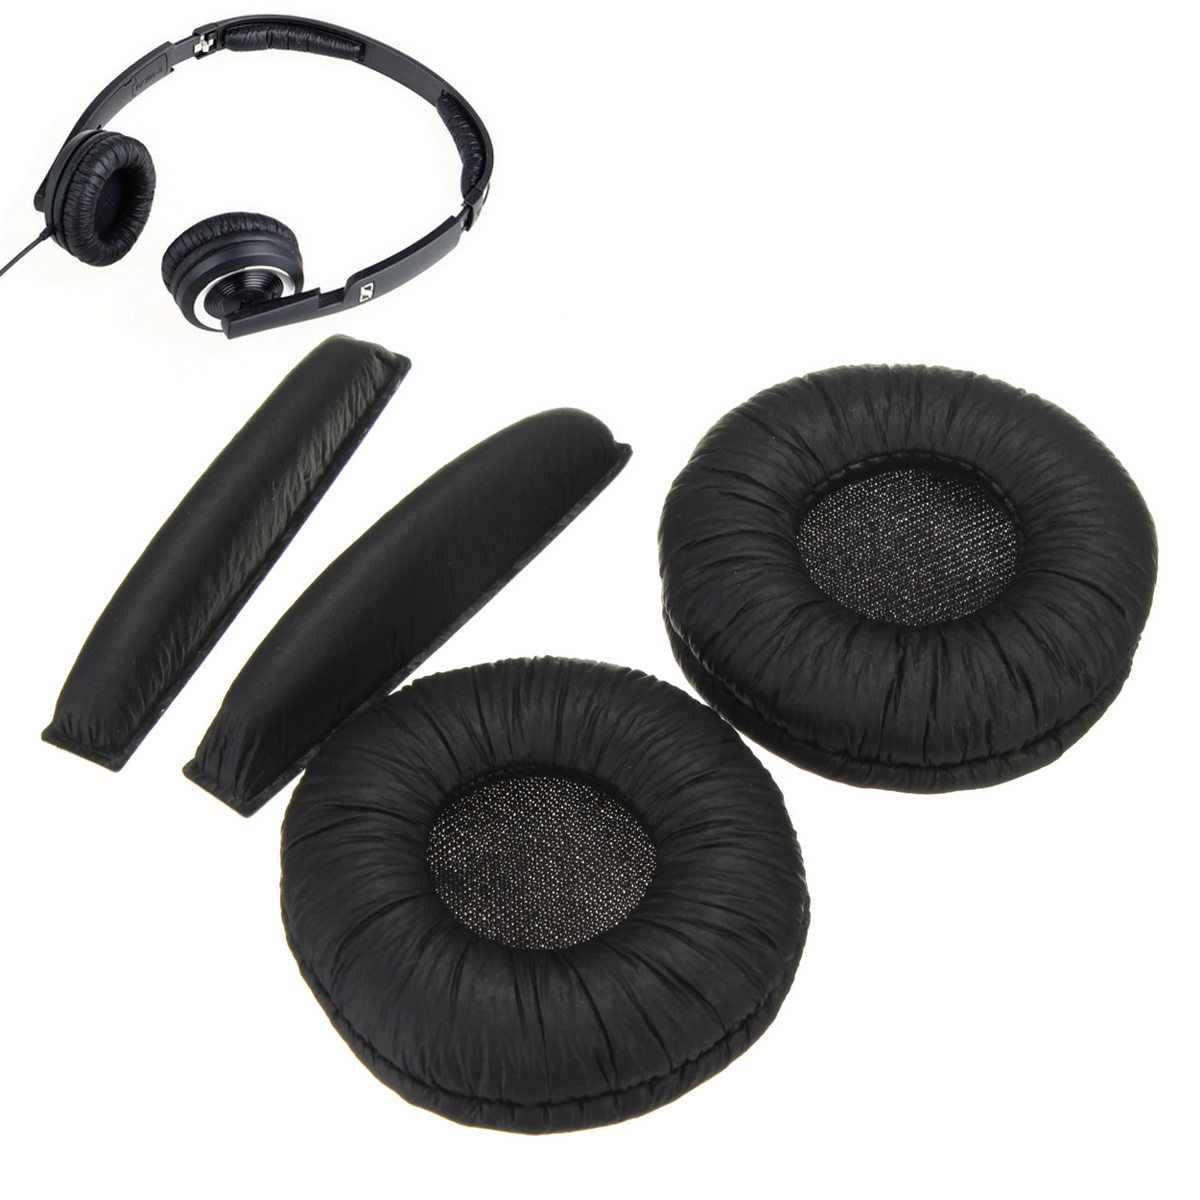 LEORY-1-Pair-For-Sennheiser-PX100-PX200-Headphone-Replacement-Ear-Pads-Cover-Headband-Cushion-1782024-10